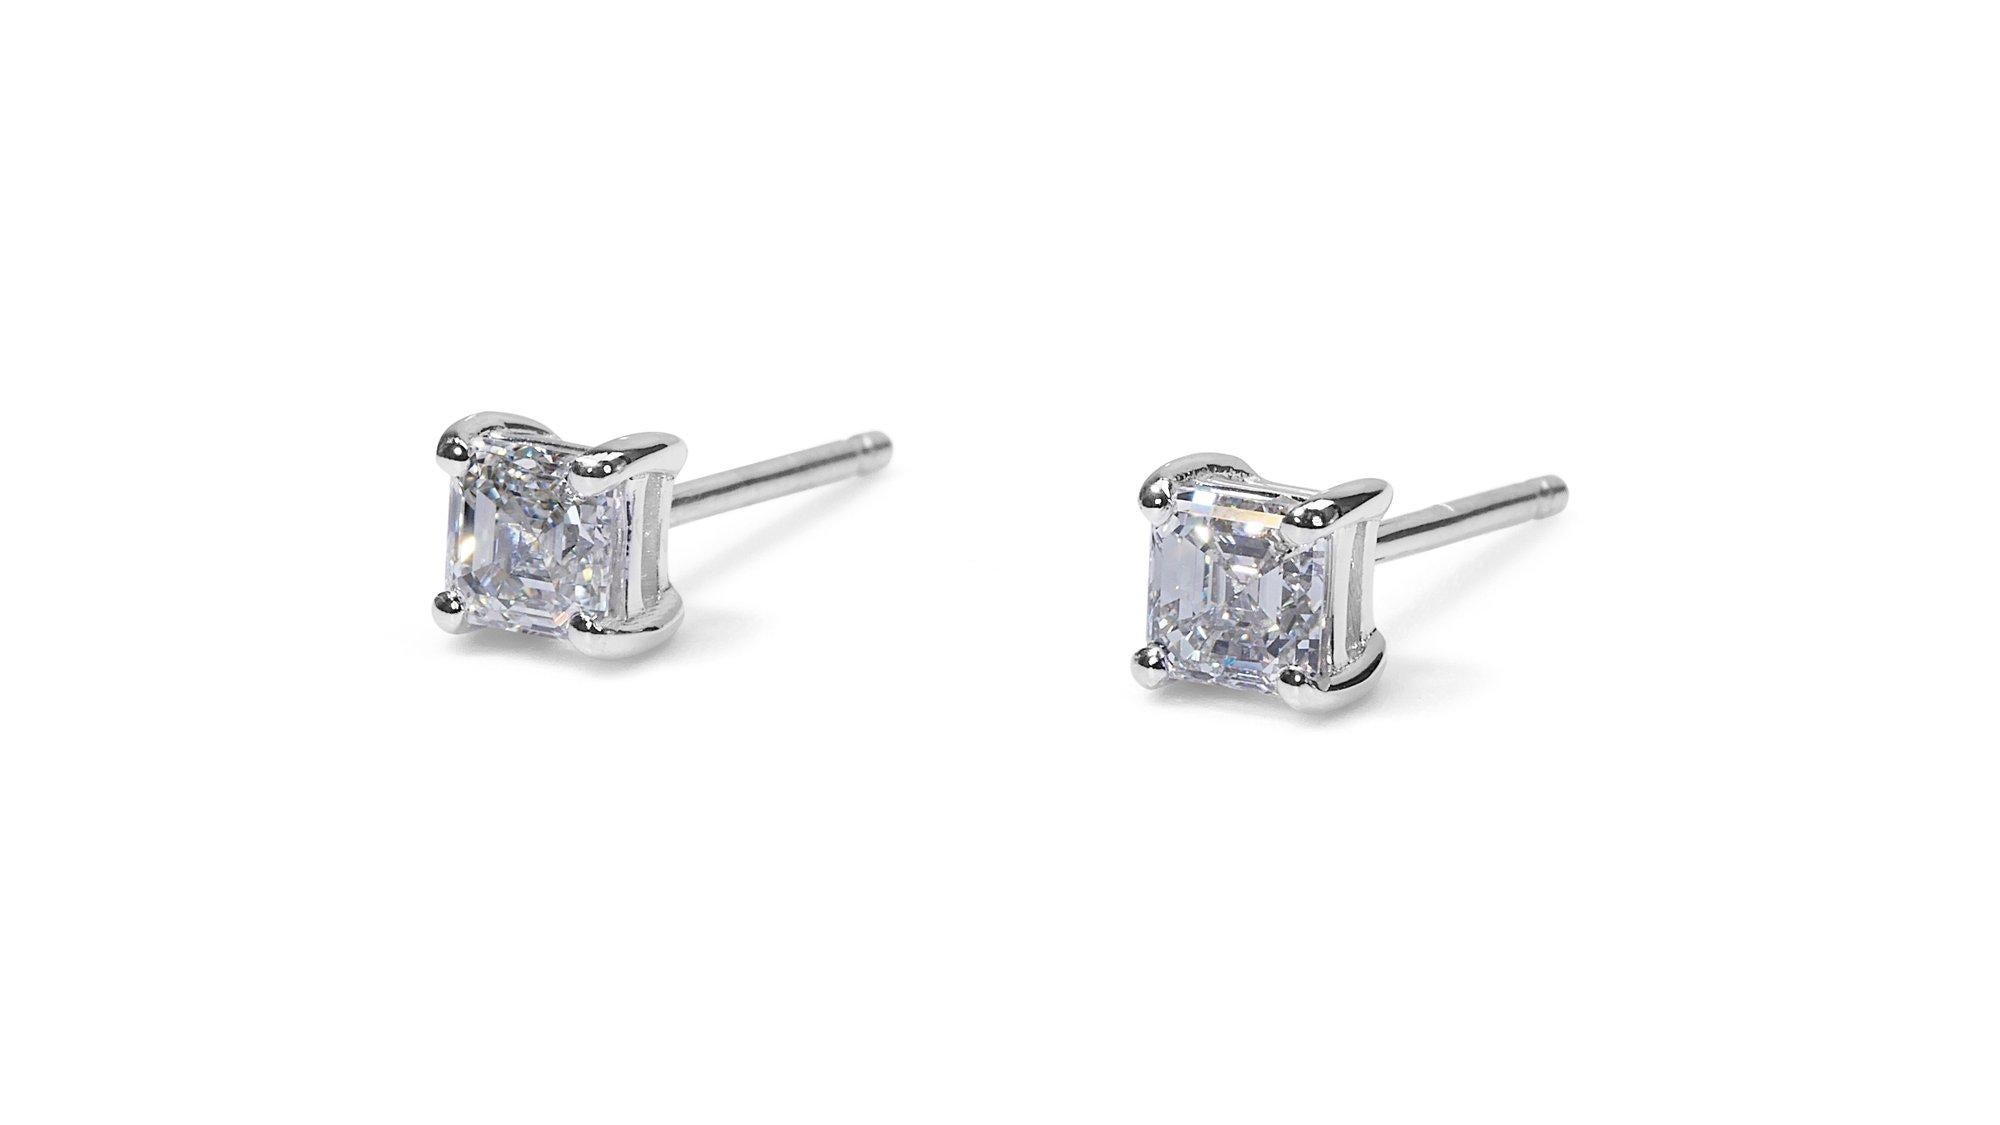 Sparkling 18k White gold Stud Earrings with 1.02 ct natural diamonds GIA Cert For Sale 1